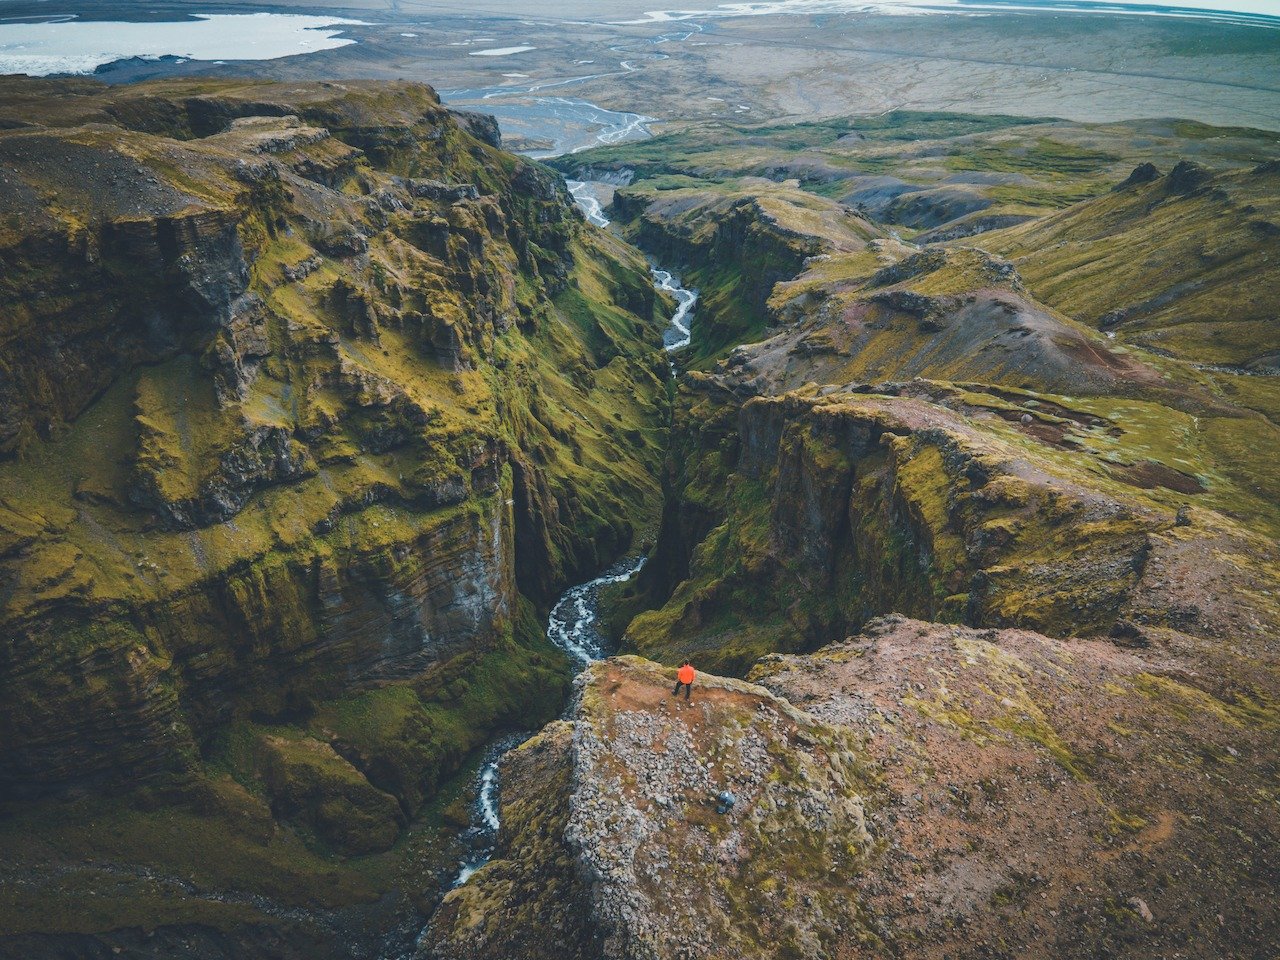 📍 Somewhere in Iceland

While driving in Iceland, it took some time to find the unmarked side road leading to the path towards Múlagljúfur canyon. I had been on my own for about 4 days at this point, driving along the ring road, before conquering 